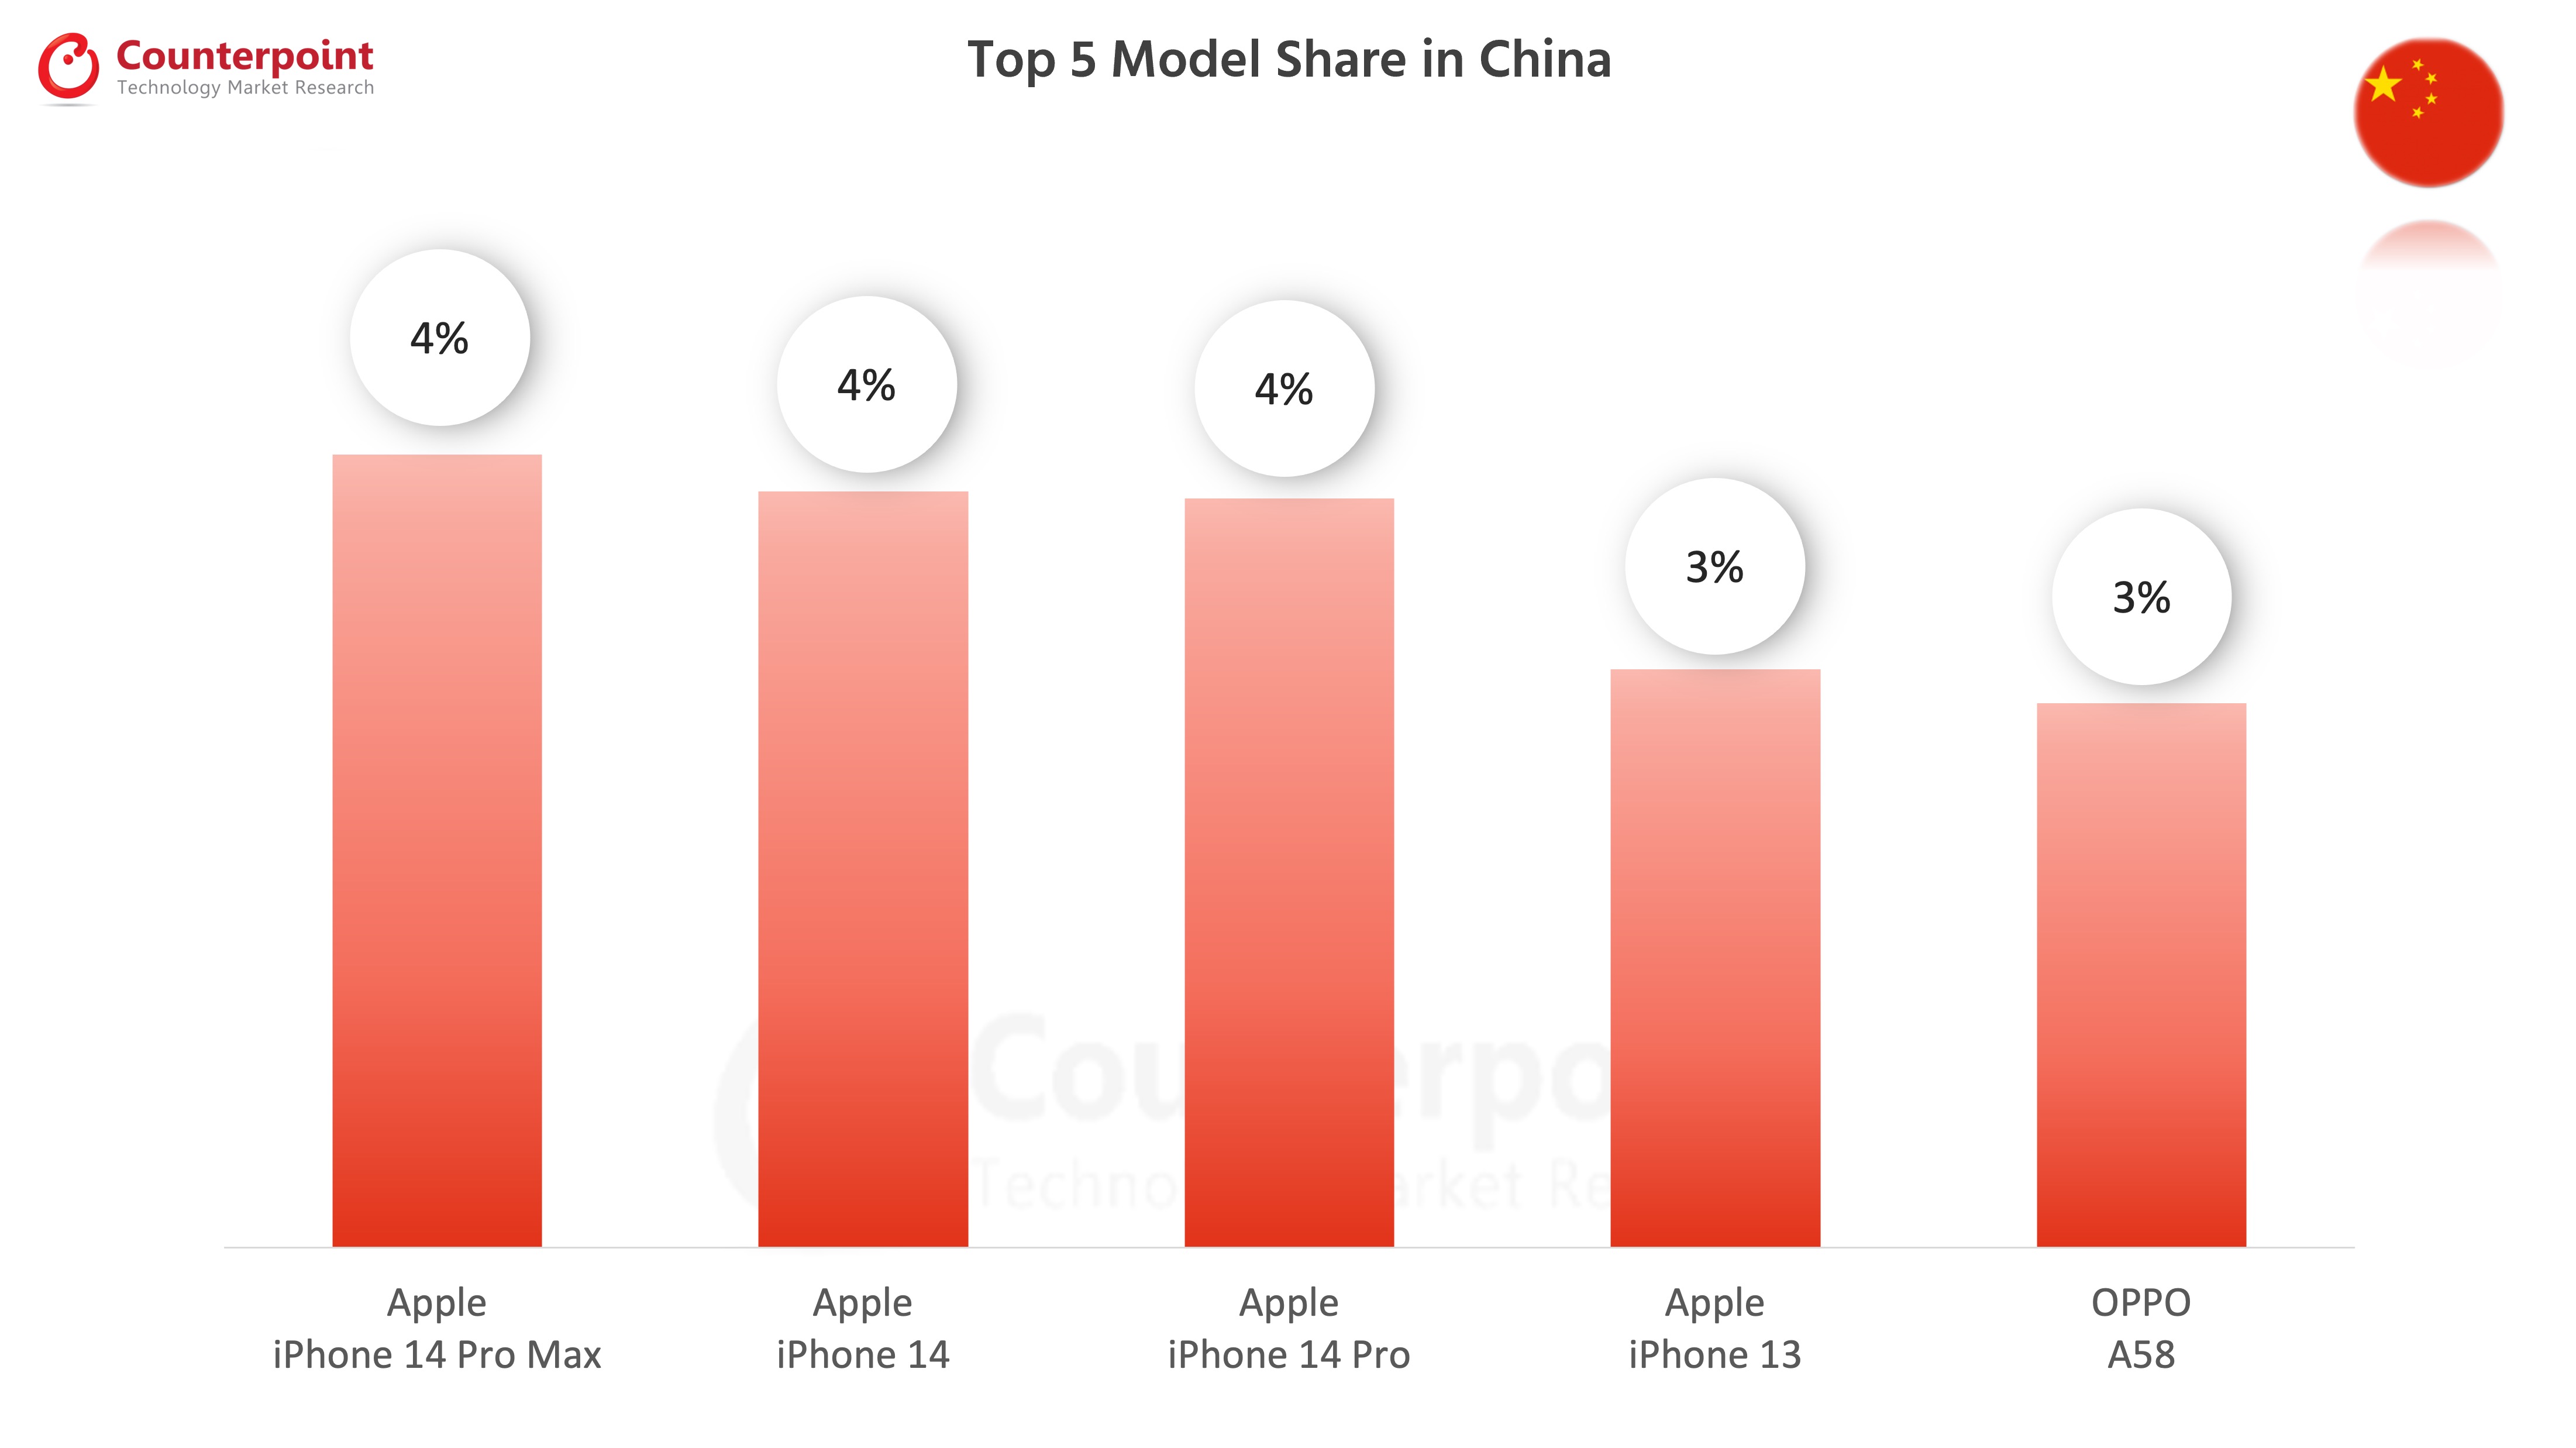 Top 5 Model Share in China